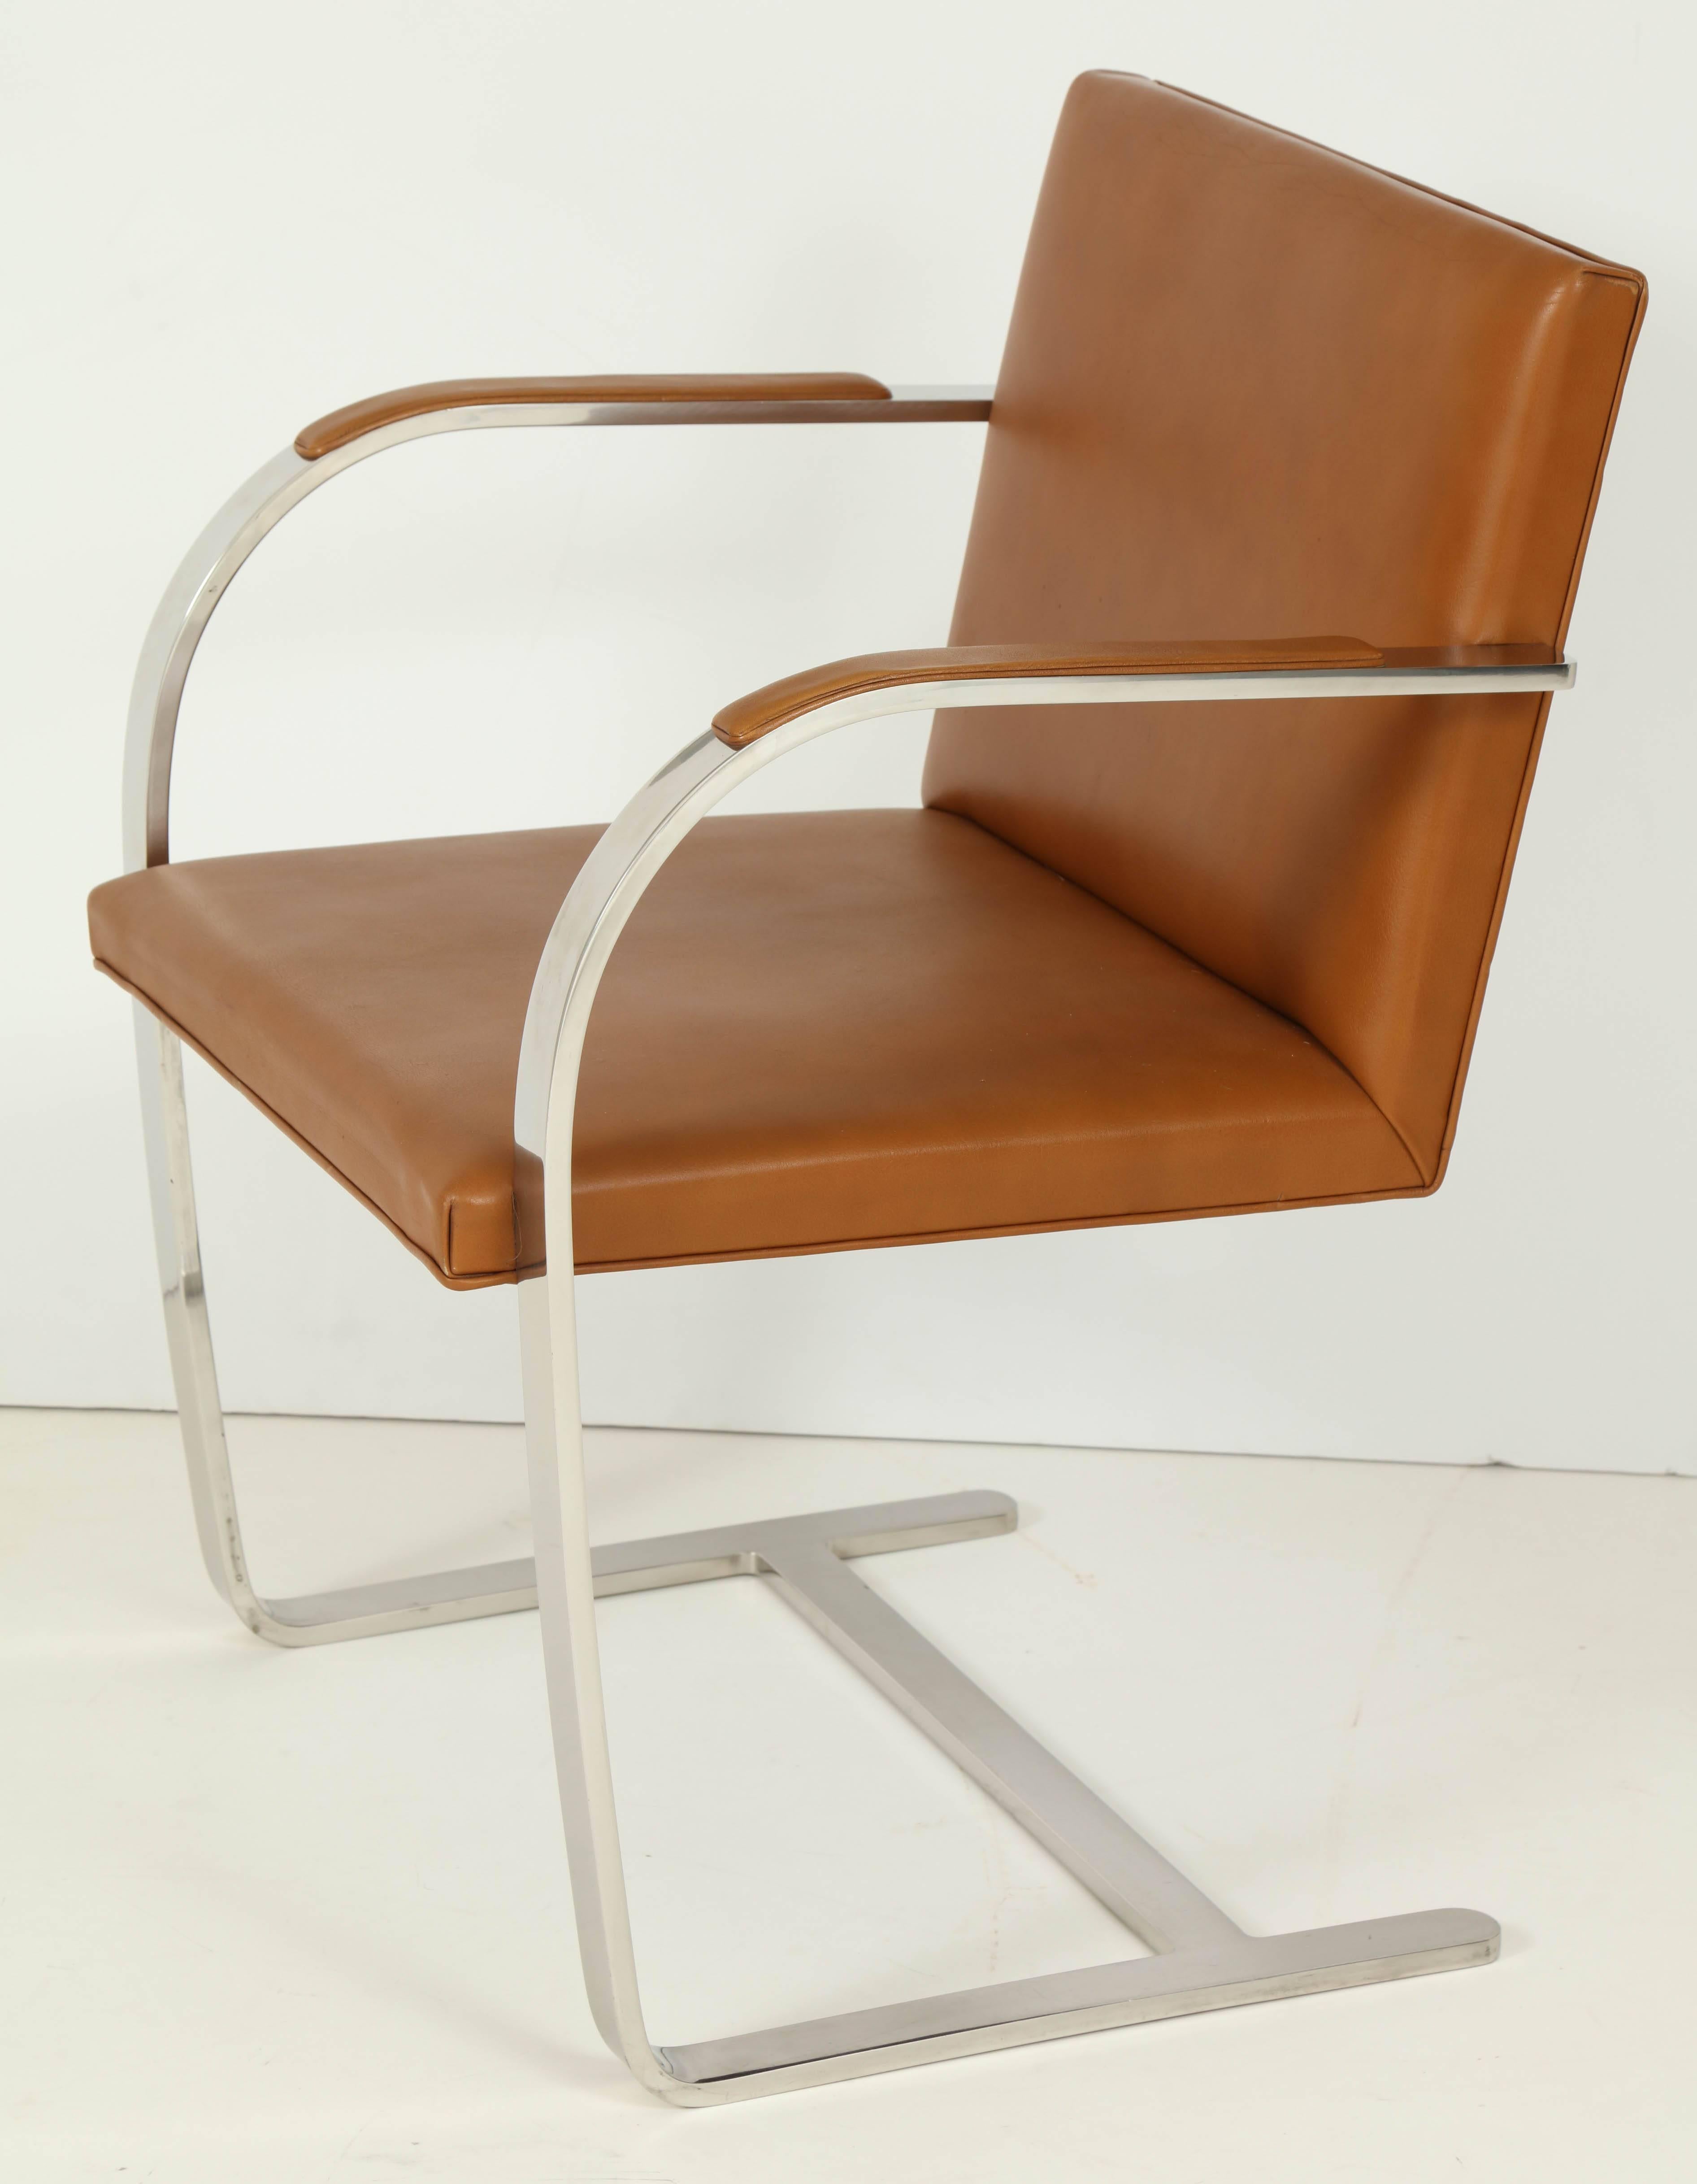 American Pair of Mies van der Rohe Brno Chairs by Knoll, circa 1960s